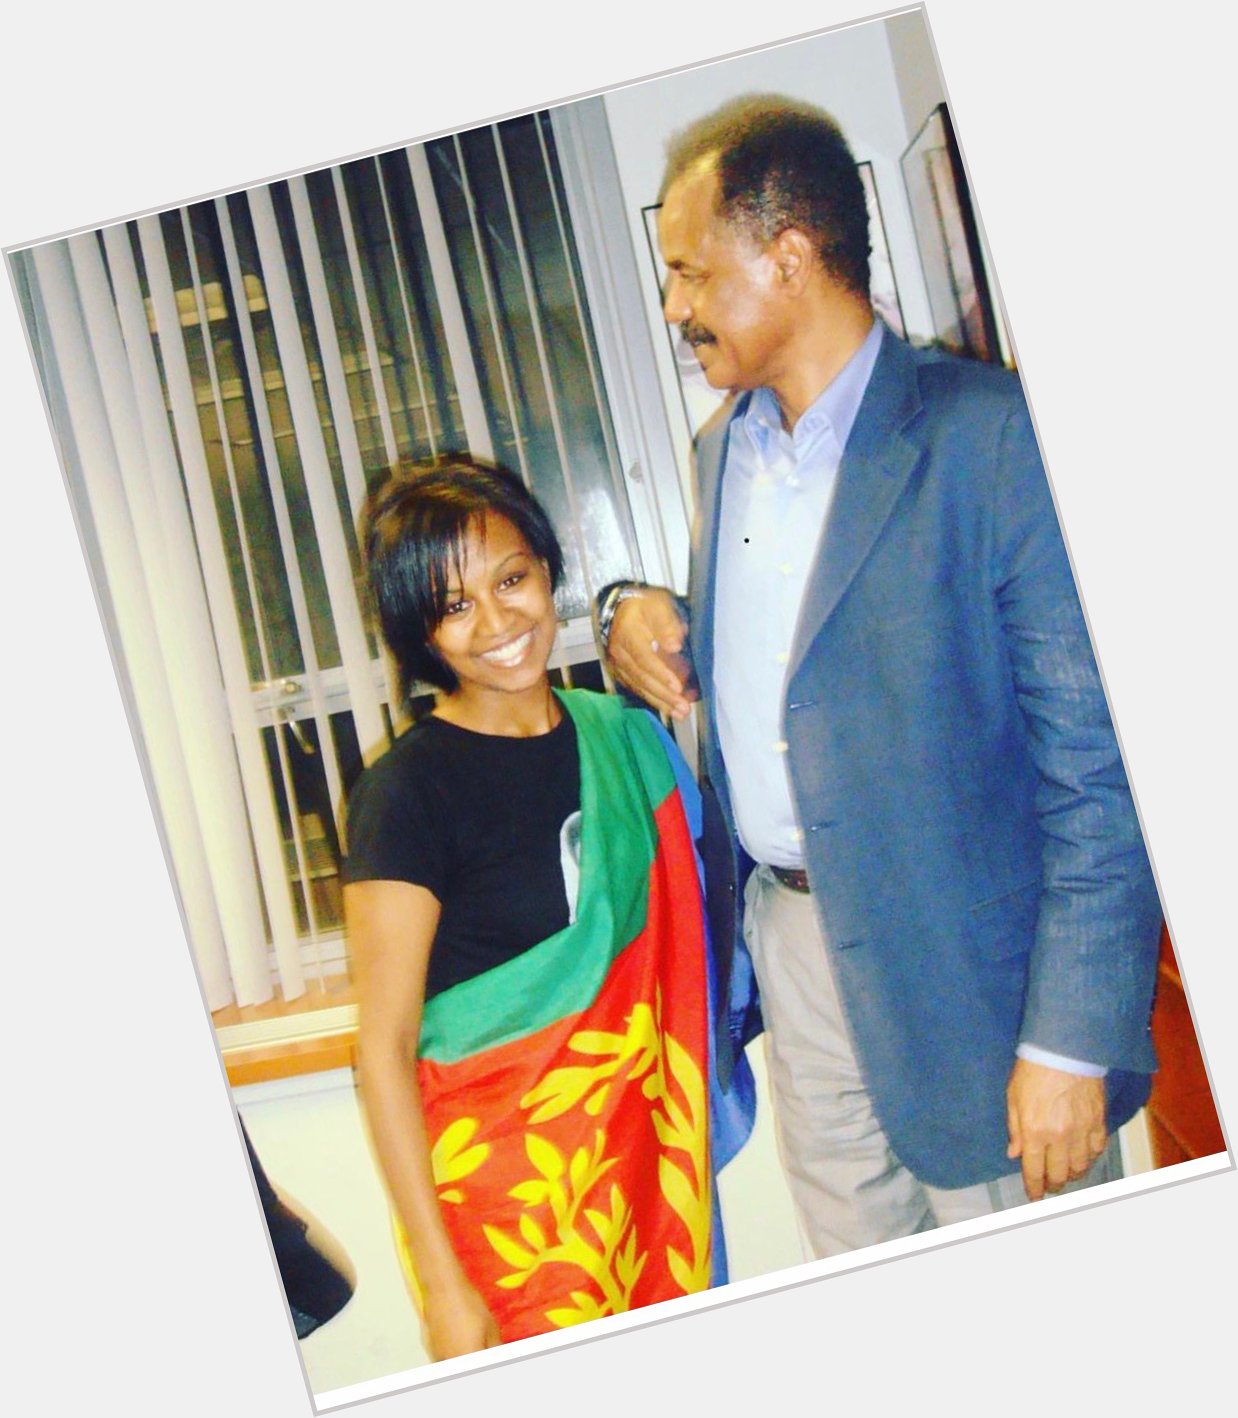 HAPPY BIRTHDAY PRESIDENT ISAIAS AFWERKI! I WISH YOU MORE YEARS OF HAPPINESS AND SUCCESS! 